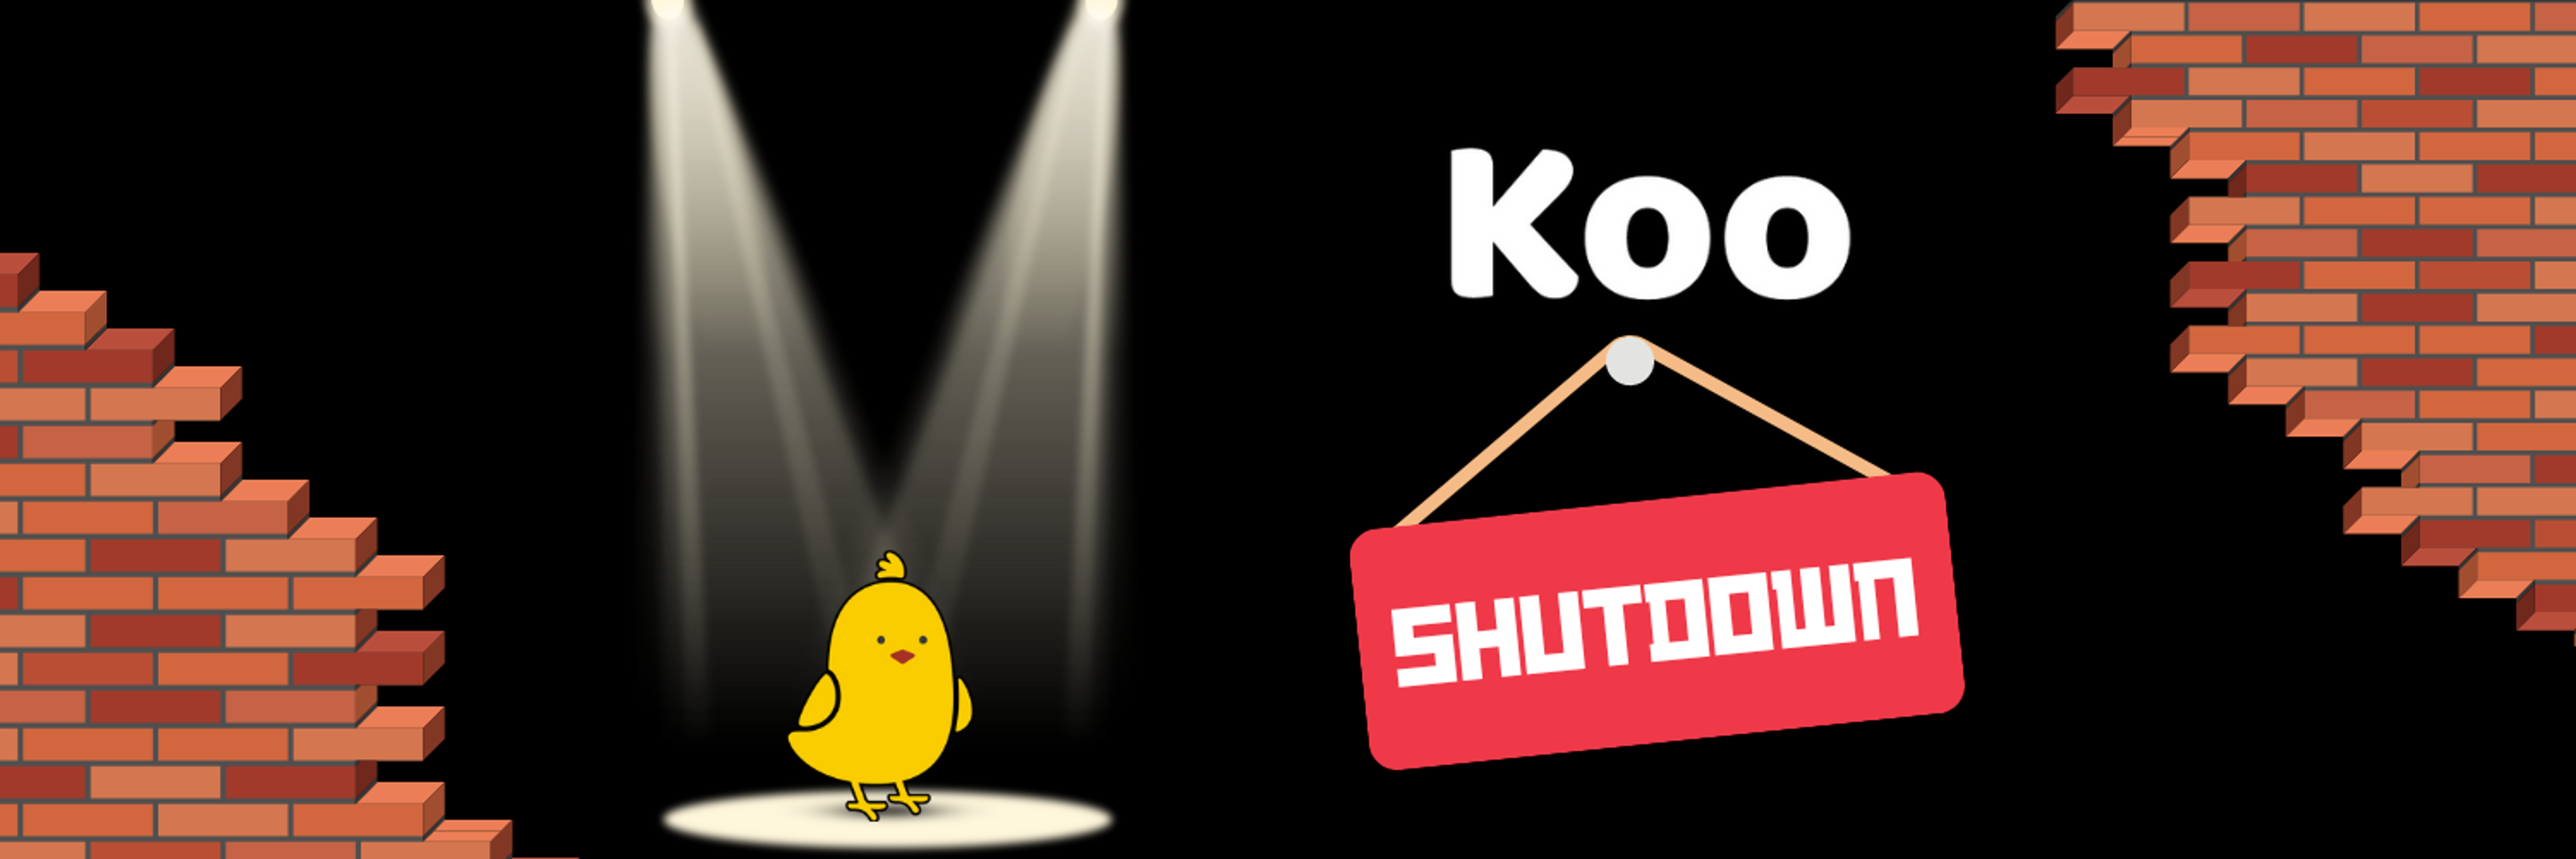 Illustration of Koo's mascot, a small yellow bird, standing in a spotlight on a dark stage, flanked by two brick walls. The word 'Koo' appears prominently above a red 'Shutdown' sign hanging next to the bird, symbolizing the closure of the Indian social media platform.